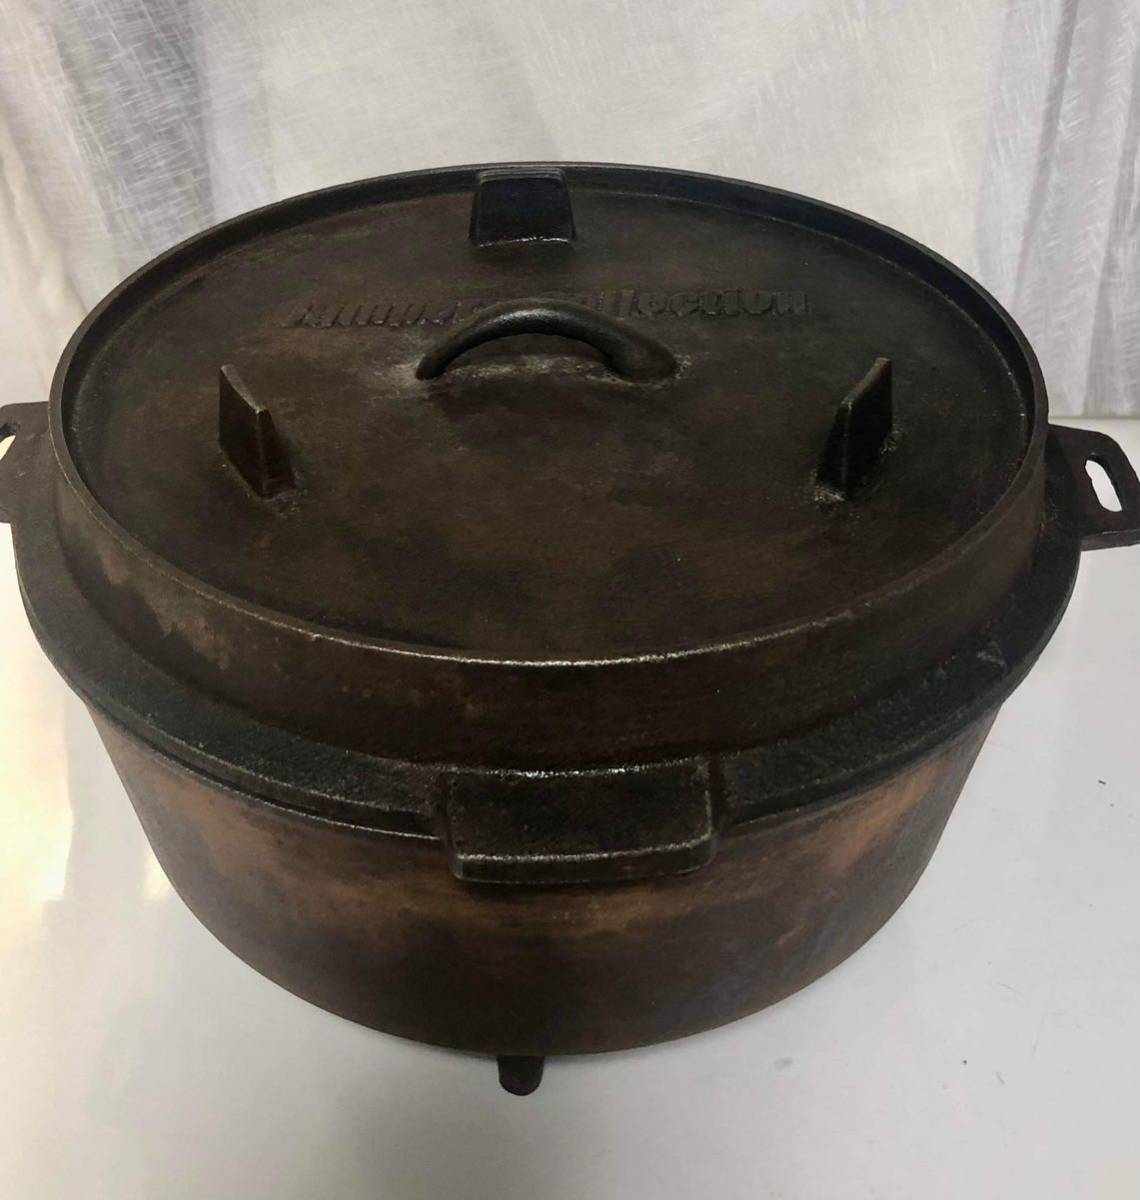 BIG SALE ★★おすすめ★★ CAMPERS COLLECTION USED DUTCH OVEN USED キャンパーズコレクション ダッチオーブン 中古です。_画像1